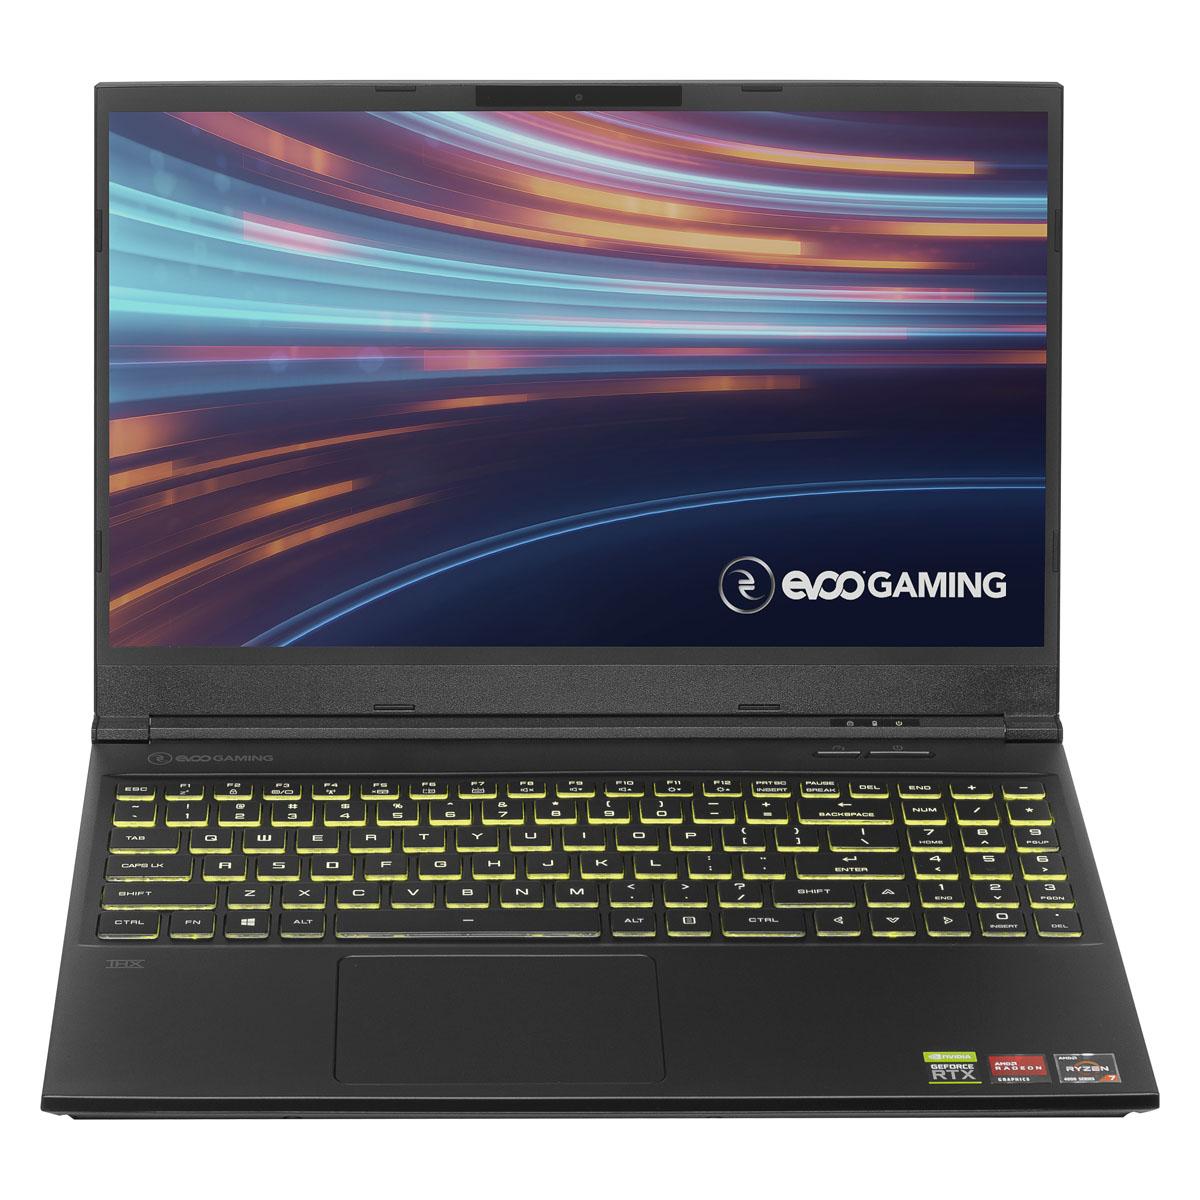 EVOO Gaming 15.6in Ryzen 7 16GB 512GB RTX 2060 Notebook Laptop for $995 Shipped